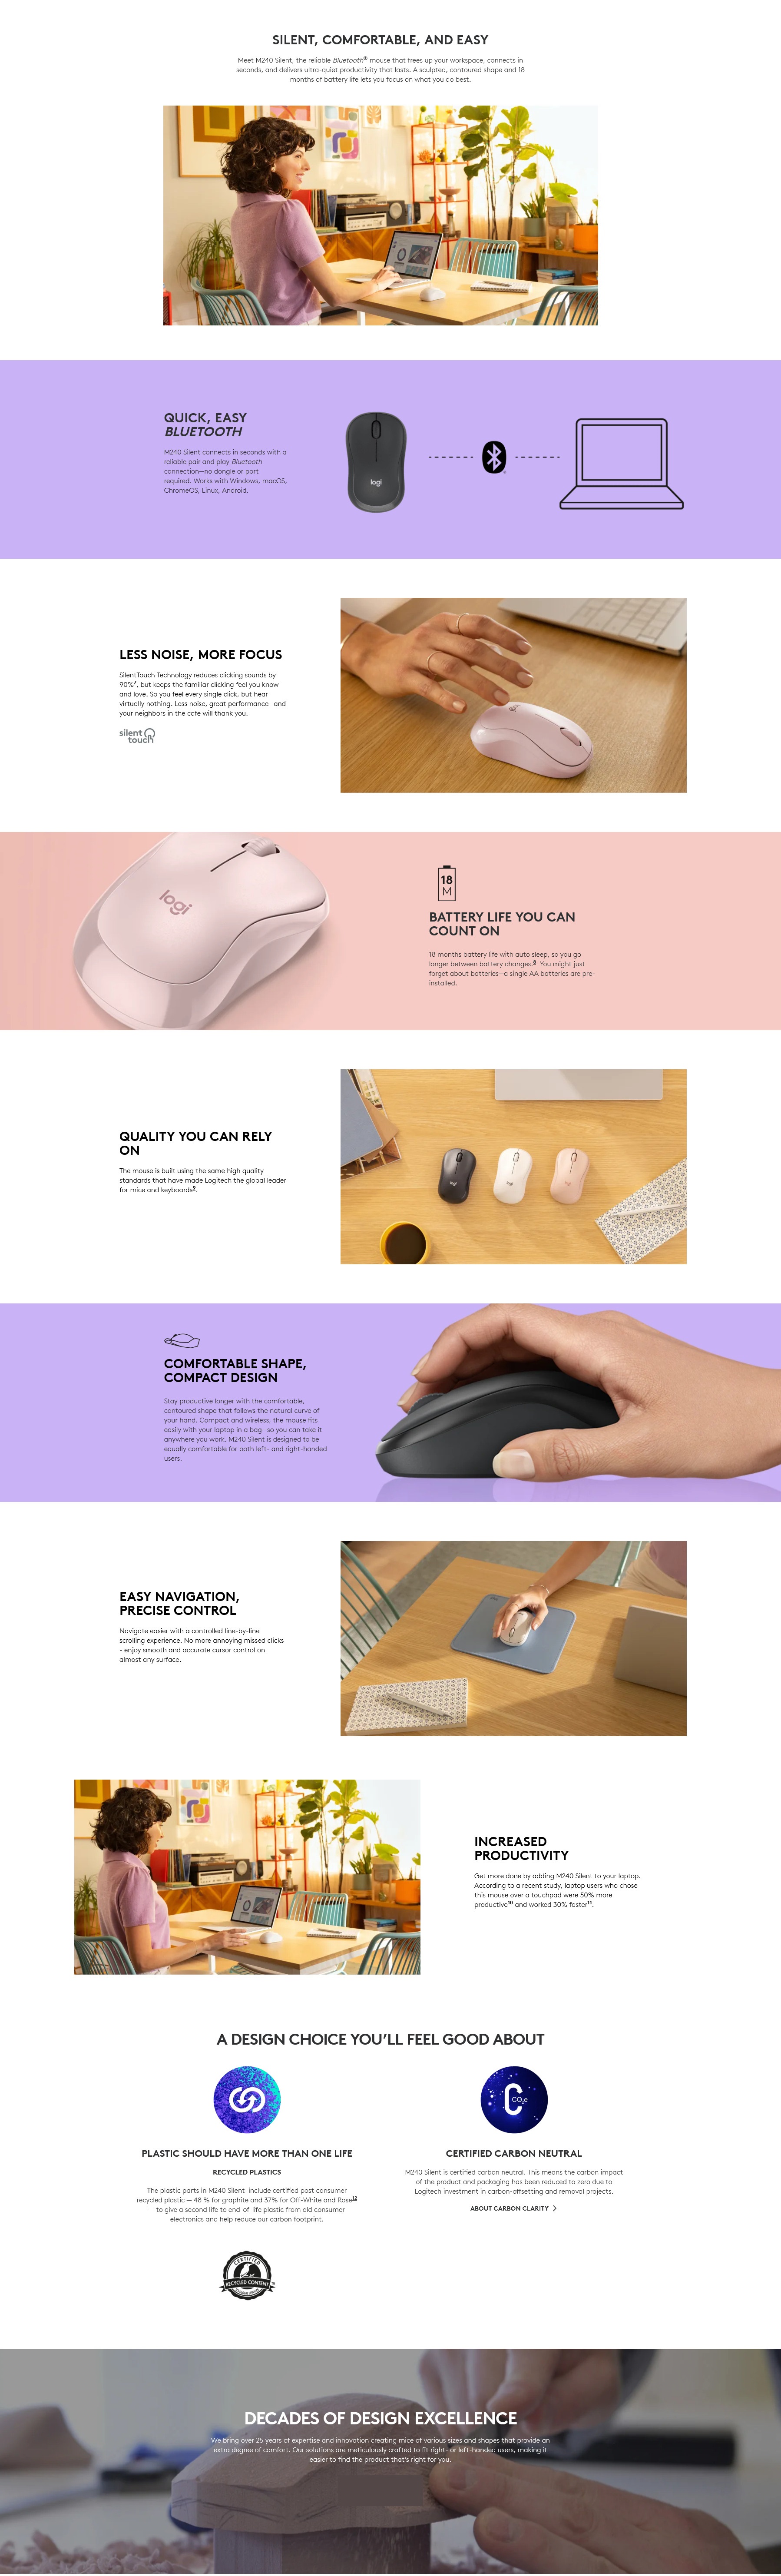 A large marketing image providing additional information about the product Logitech M240 Silent Bluetooth Mouse - Off White - Additional alt info not provided